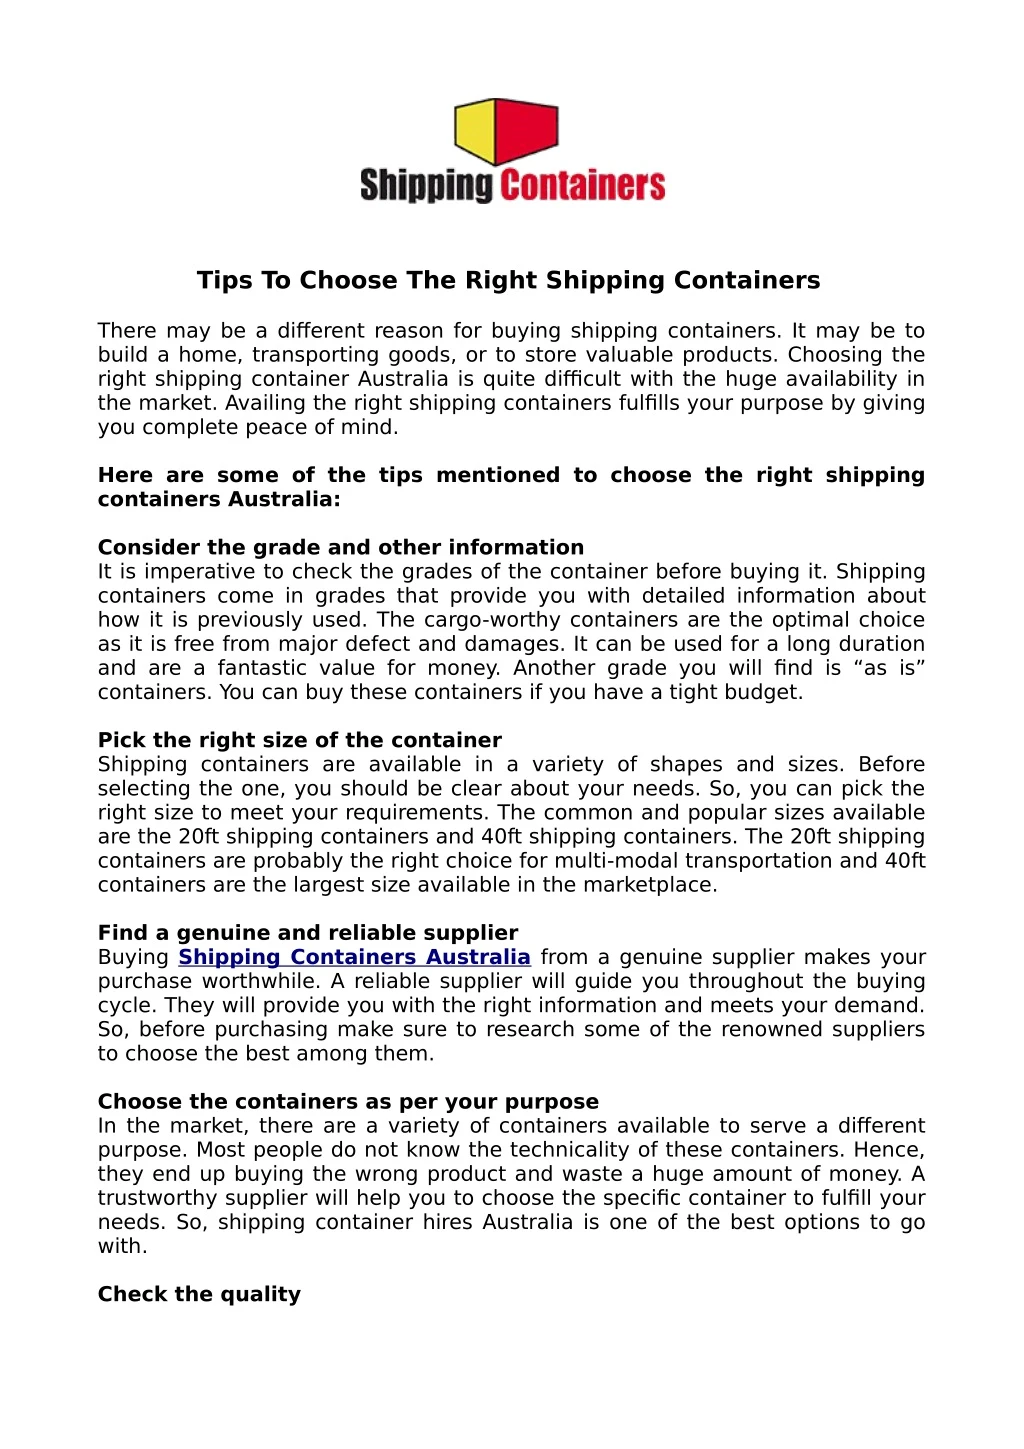 tips to choose the right shipping containers